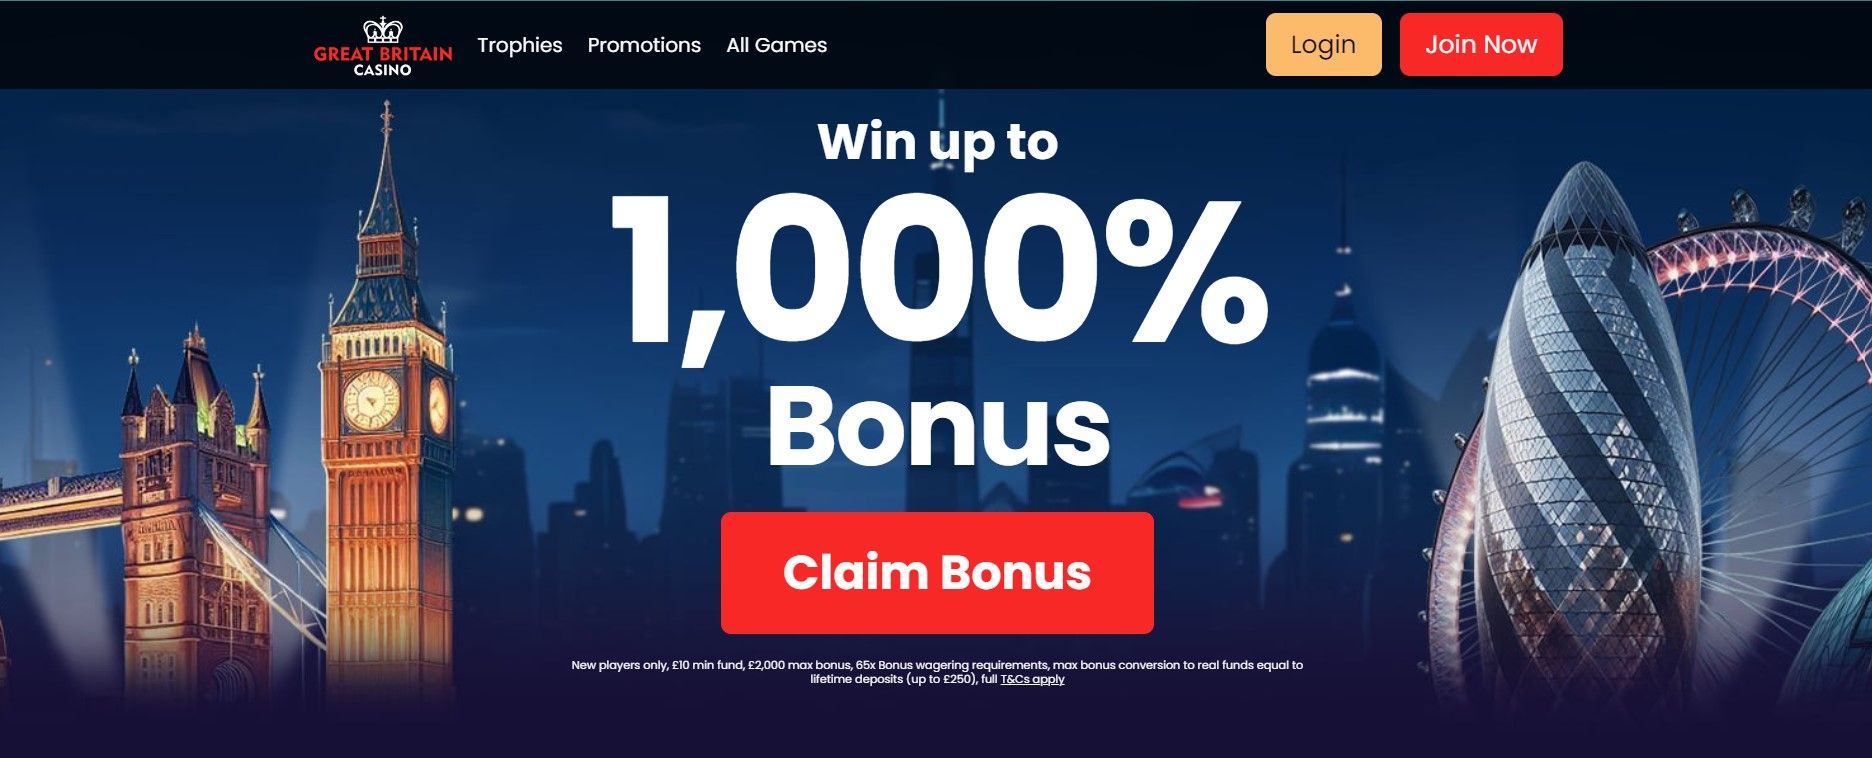 great britain online casino Offer from Go Gambling